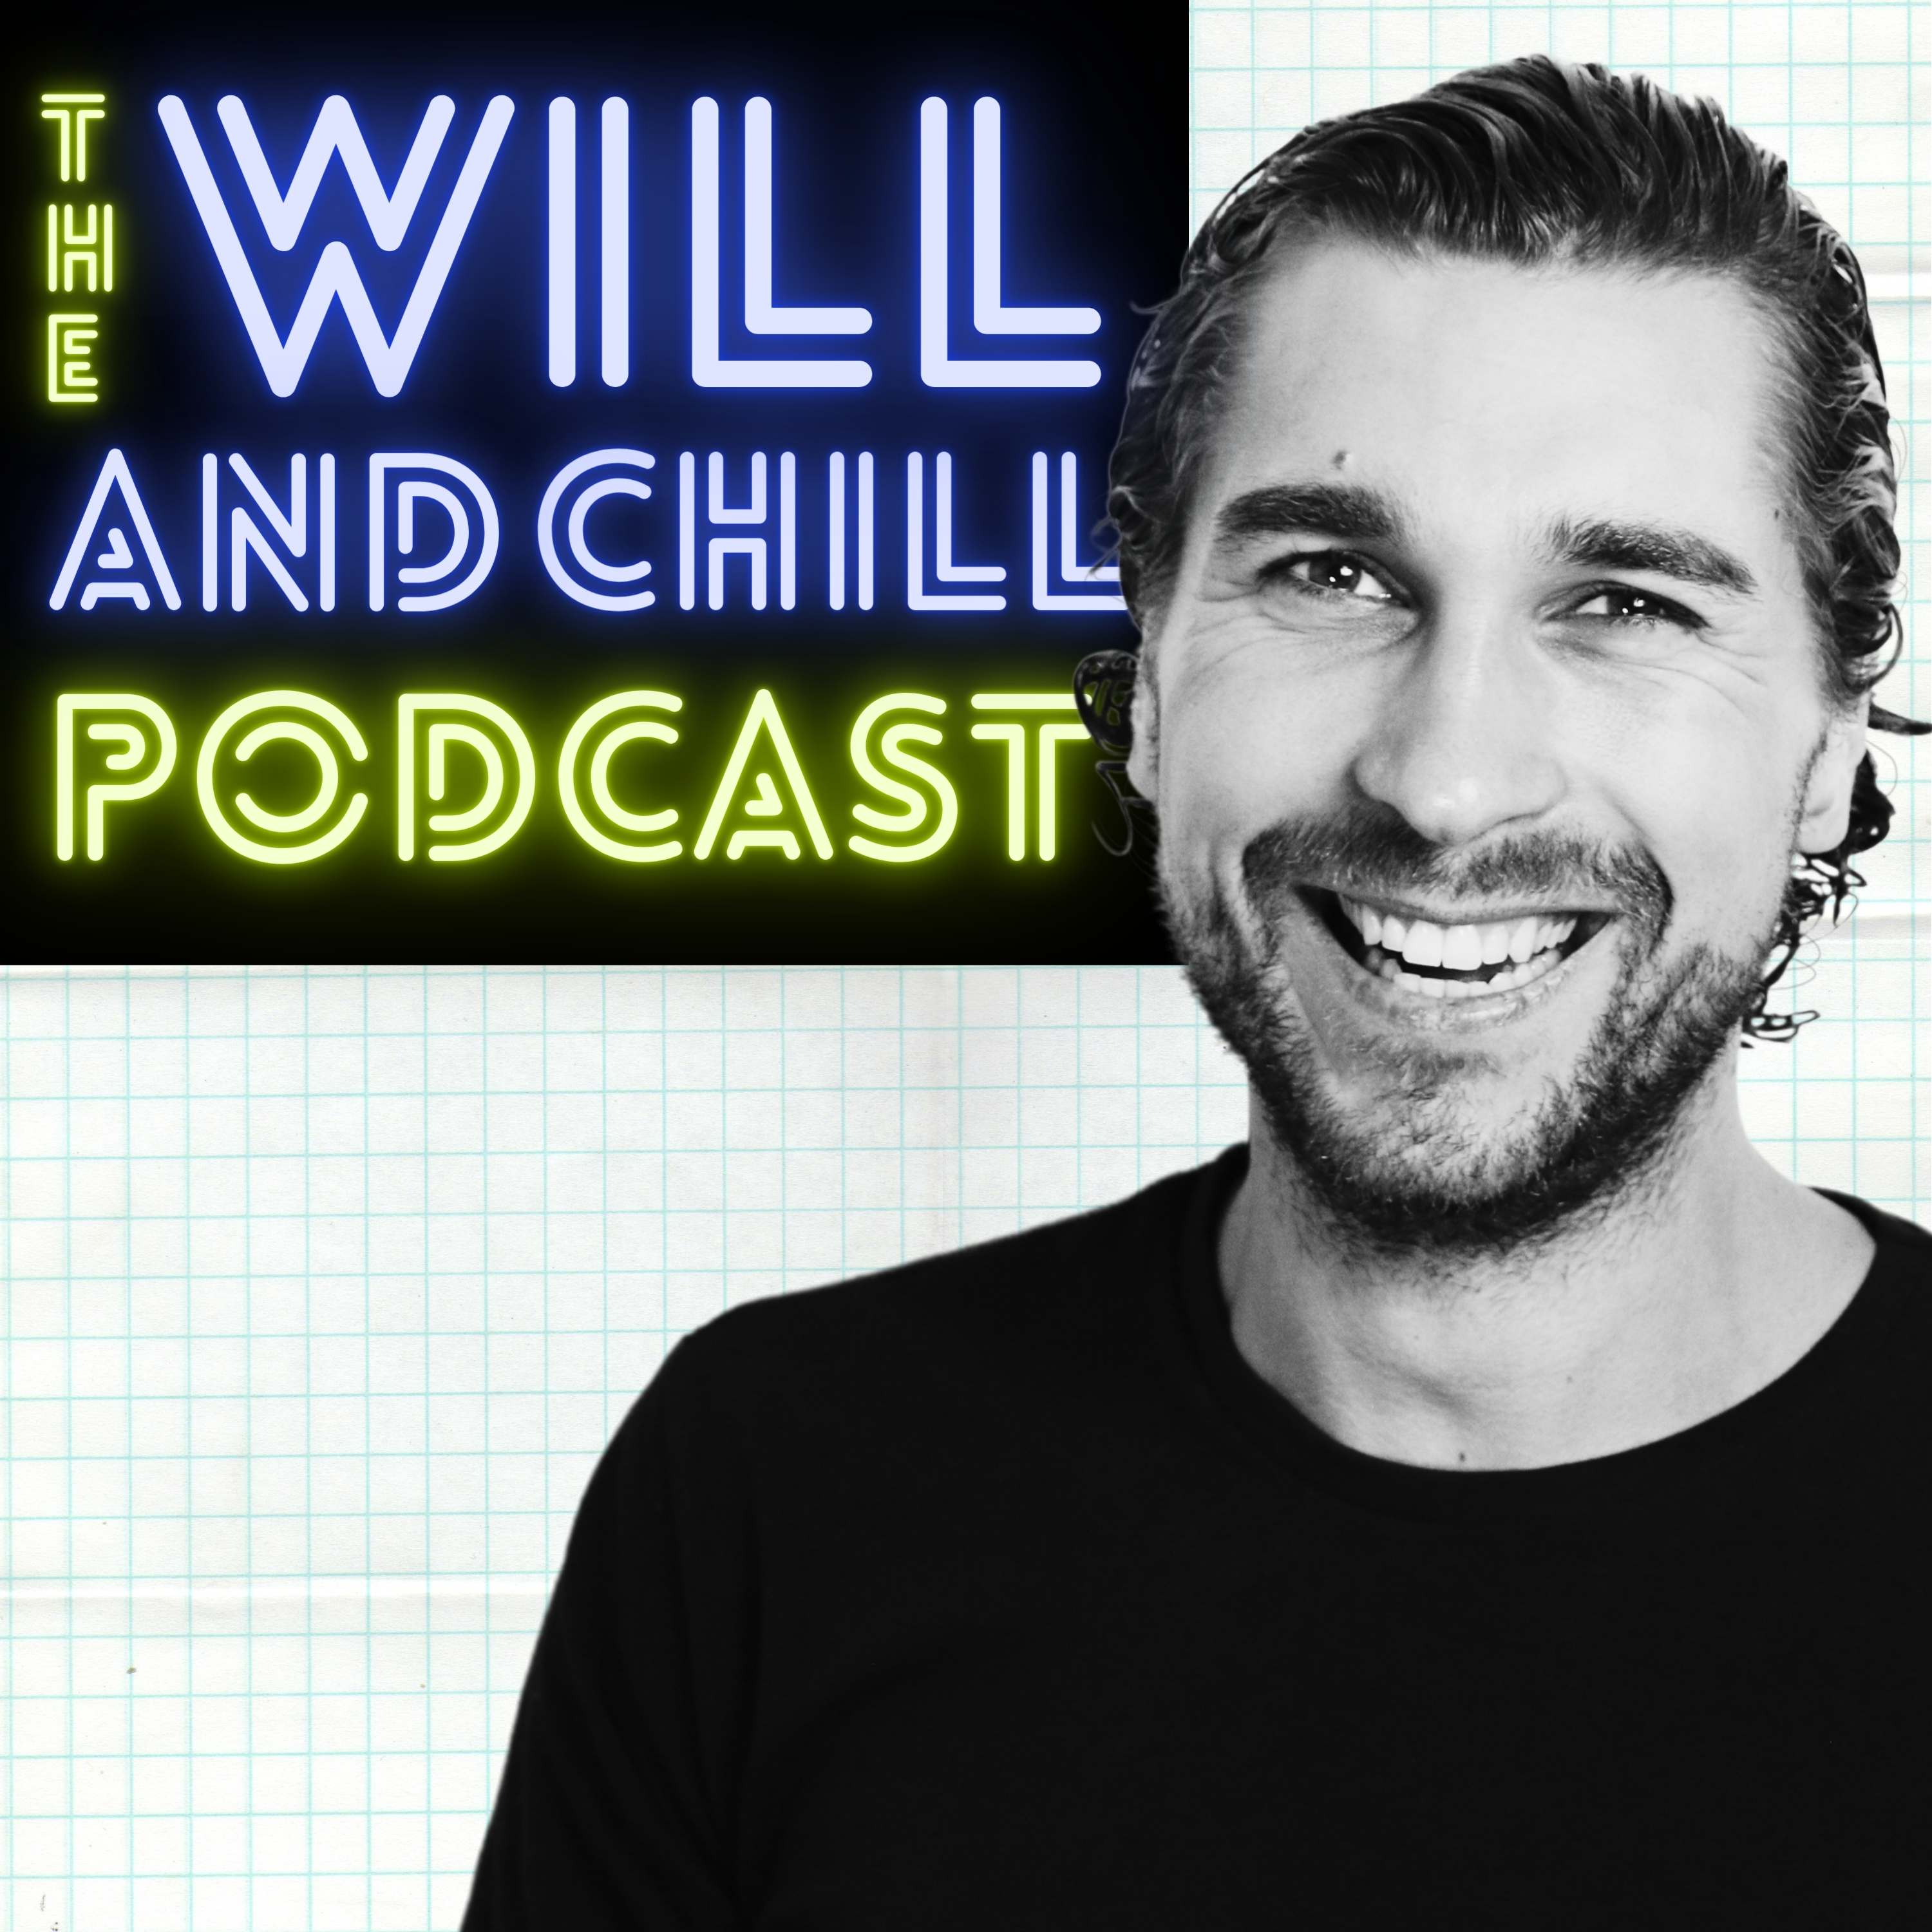 Artwork for The Will and Chill Podcast